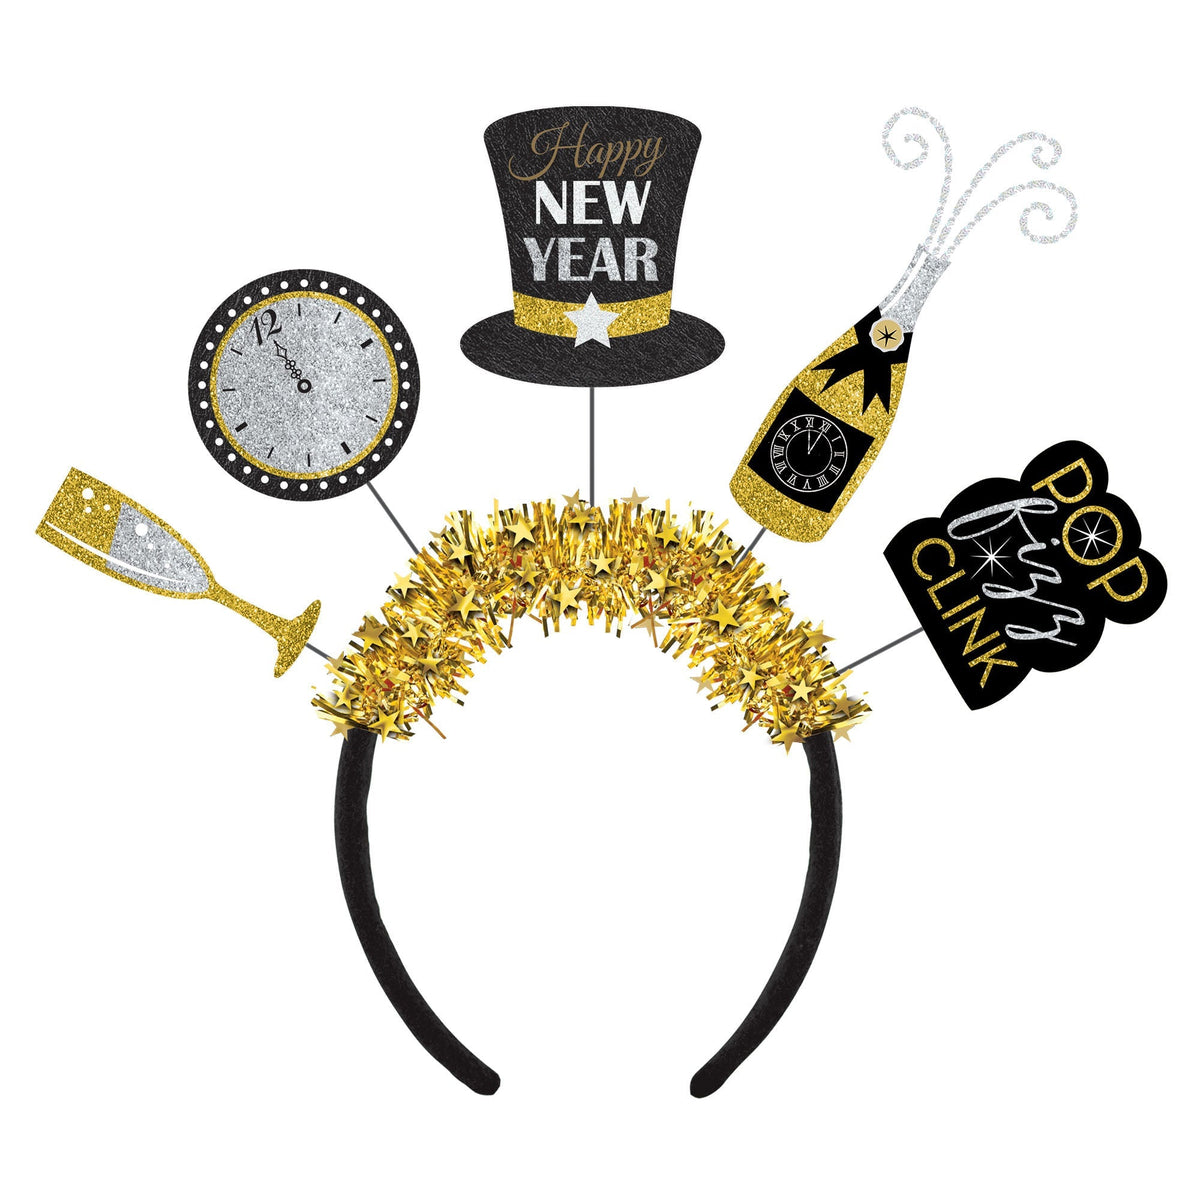 AMSCAN CA New Year New Year Black Headband with Cutouts, 1 Count